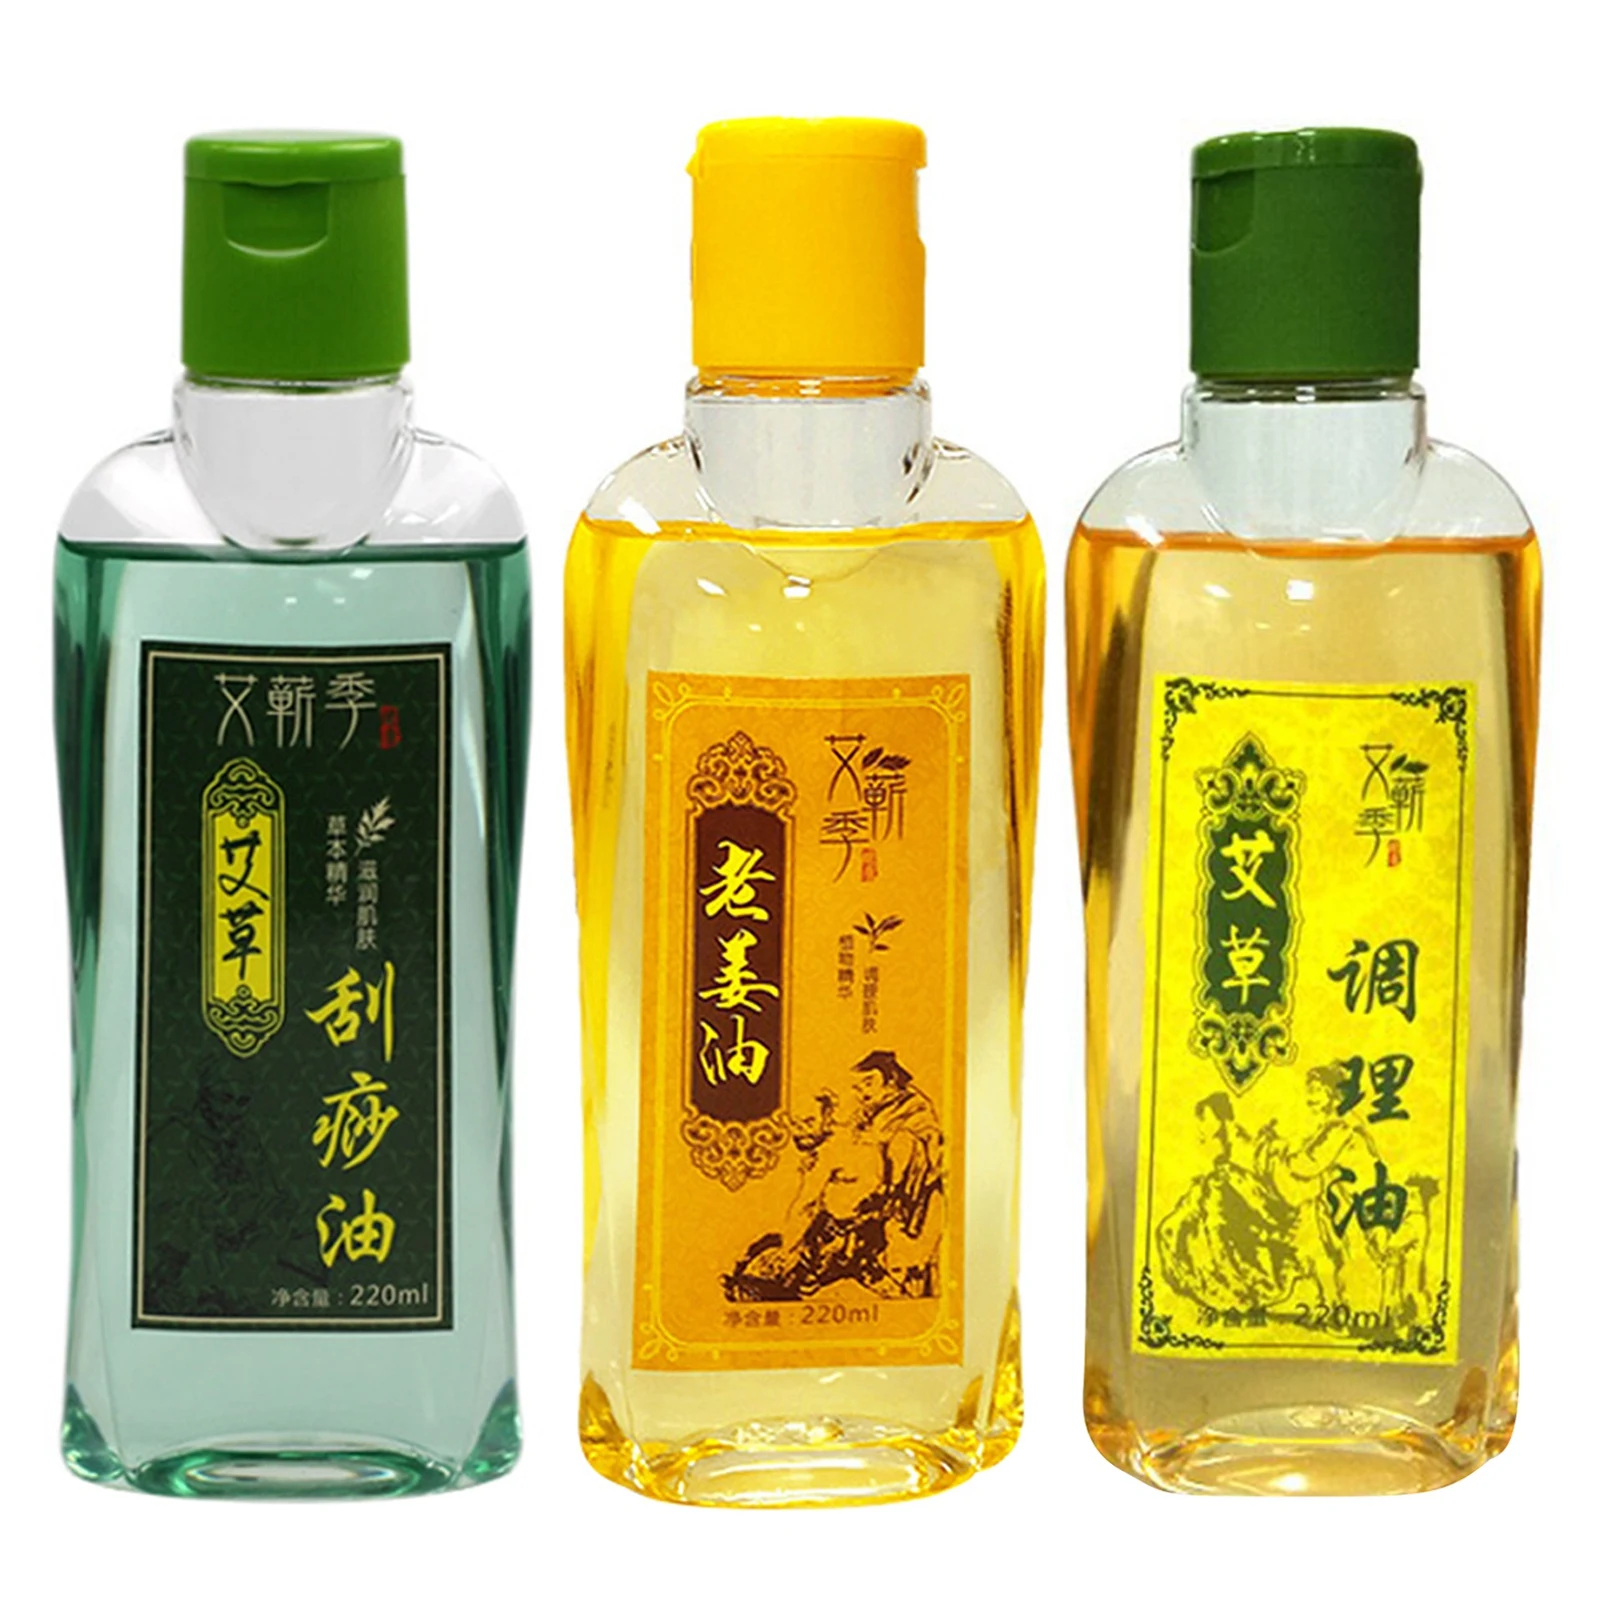 

220ml Wormwood Ginger Essential Oil Chinese Herbal Body Massage SPA Scrape Therapy Body Massage Essential Oil